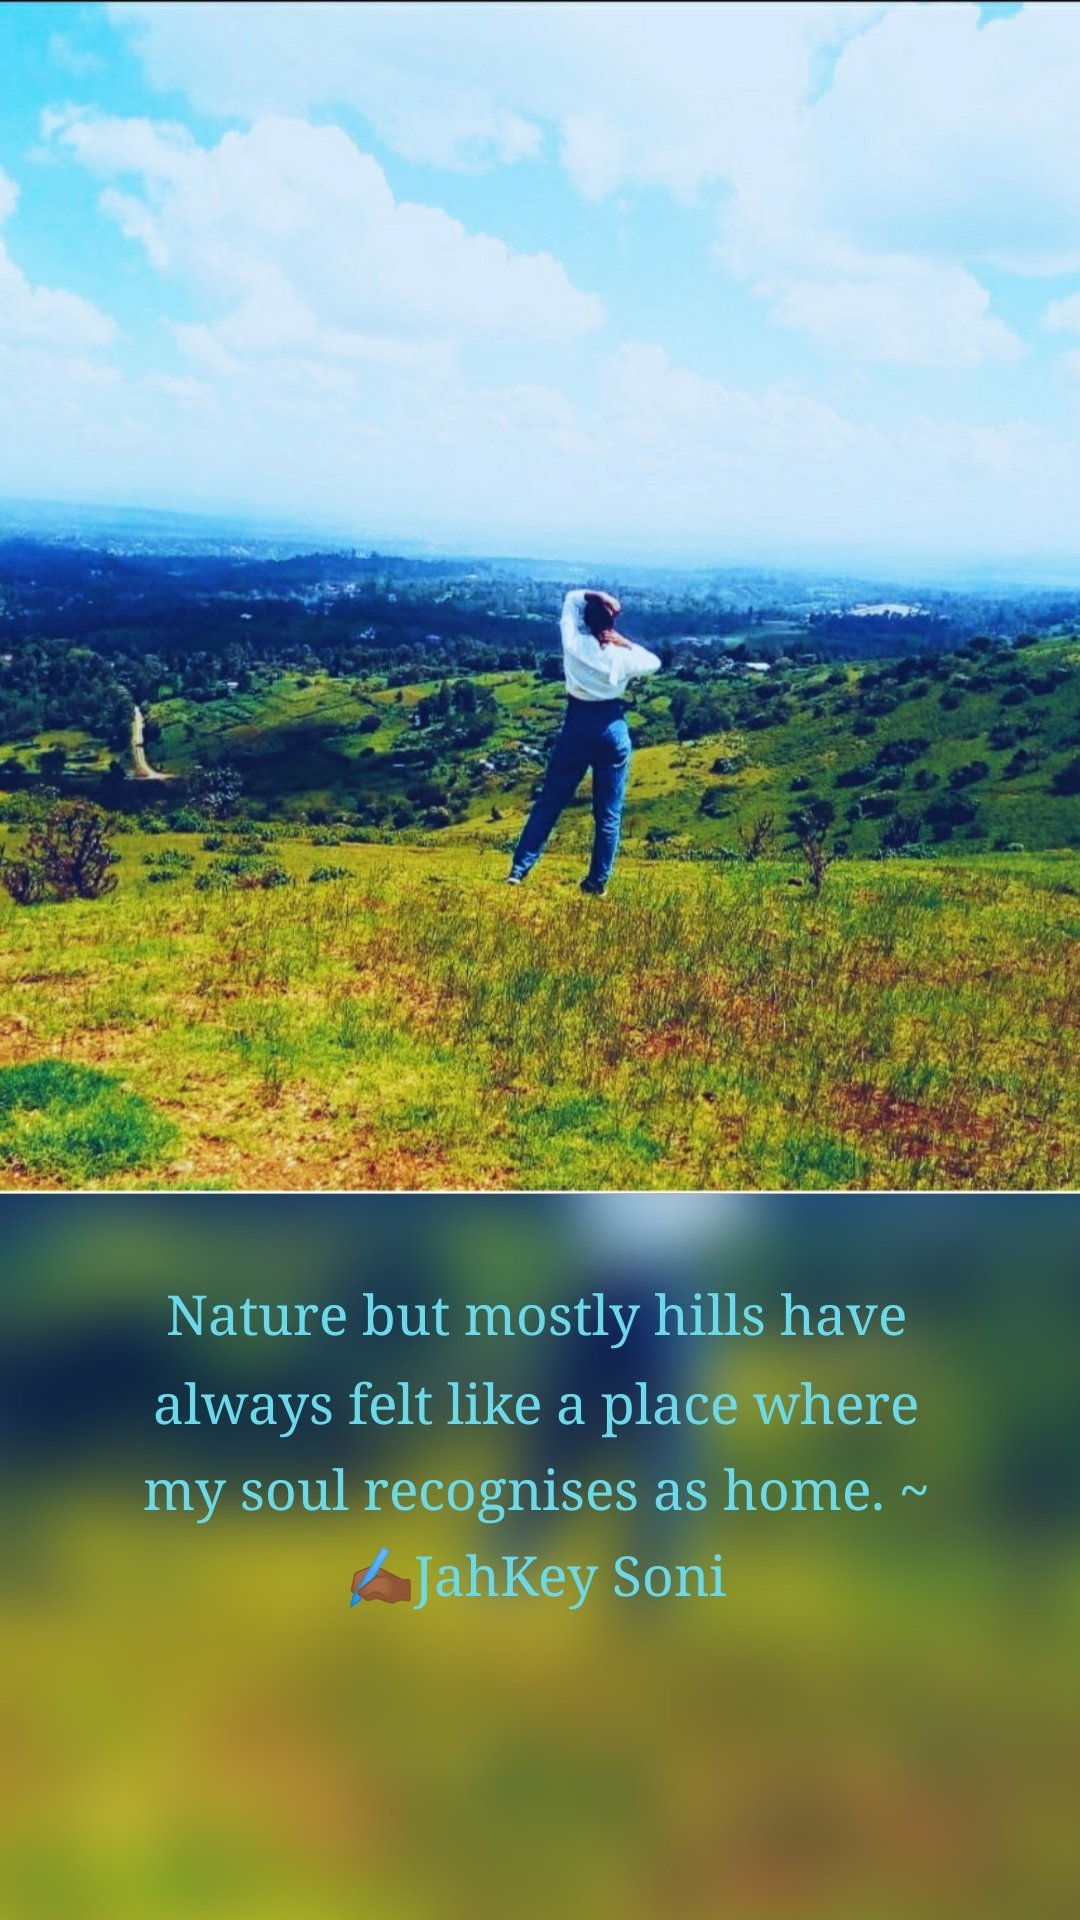 Nature but mostly hills have always felt like a place where my soul recognises as home. ~ ✍🏾JahKey Soni